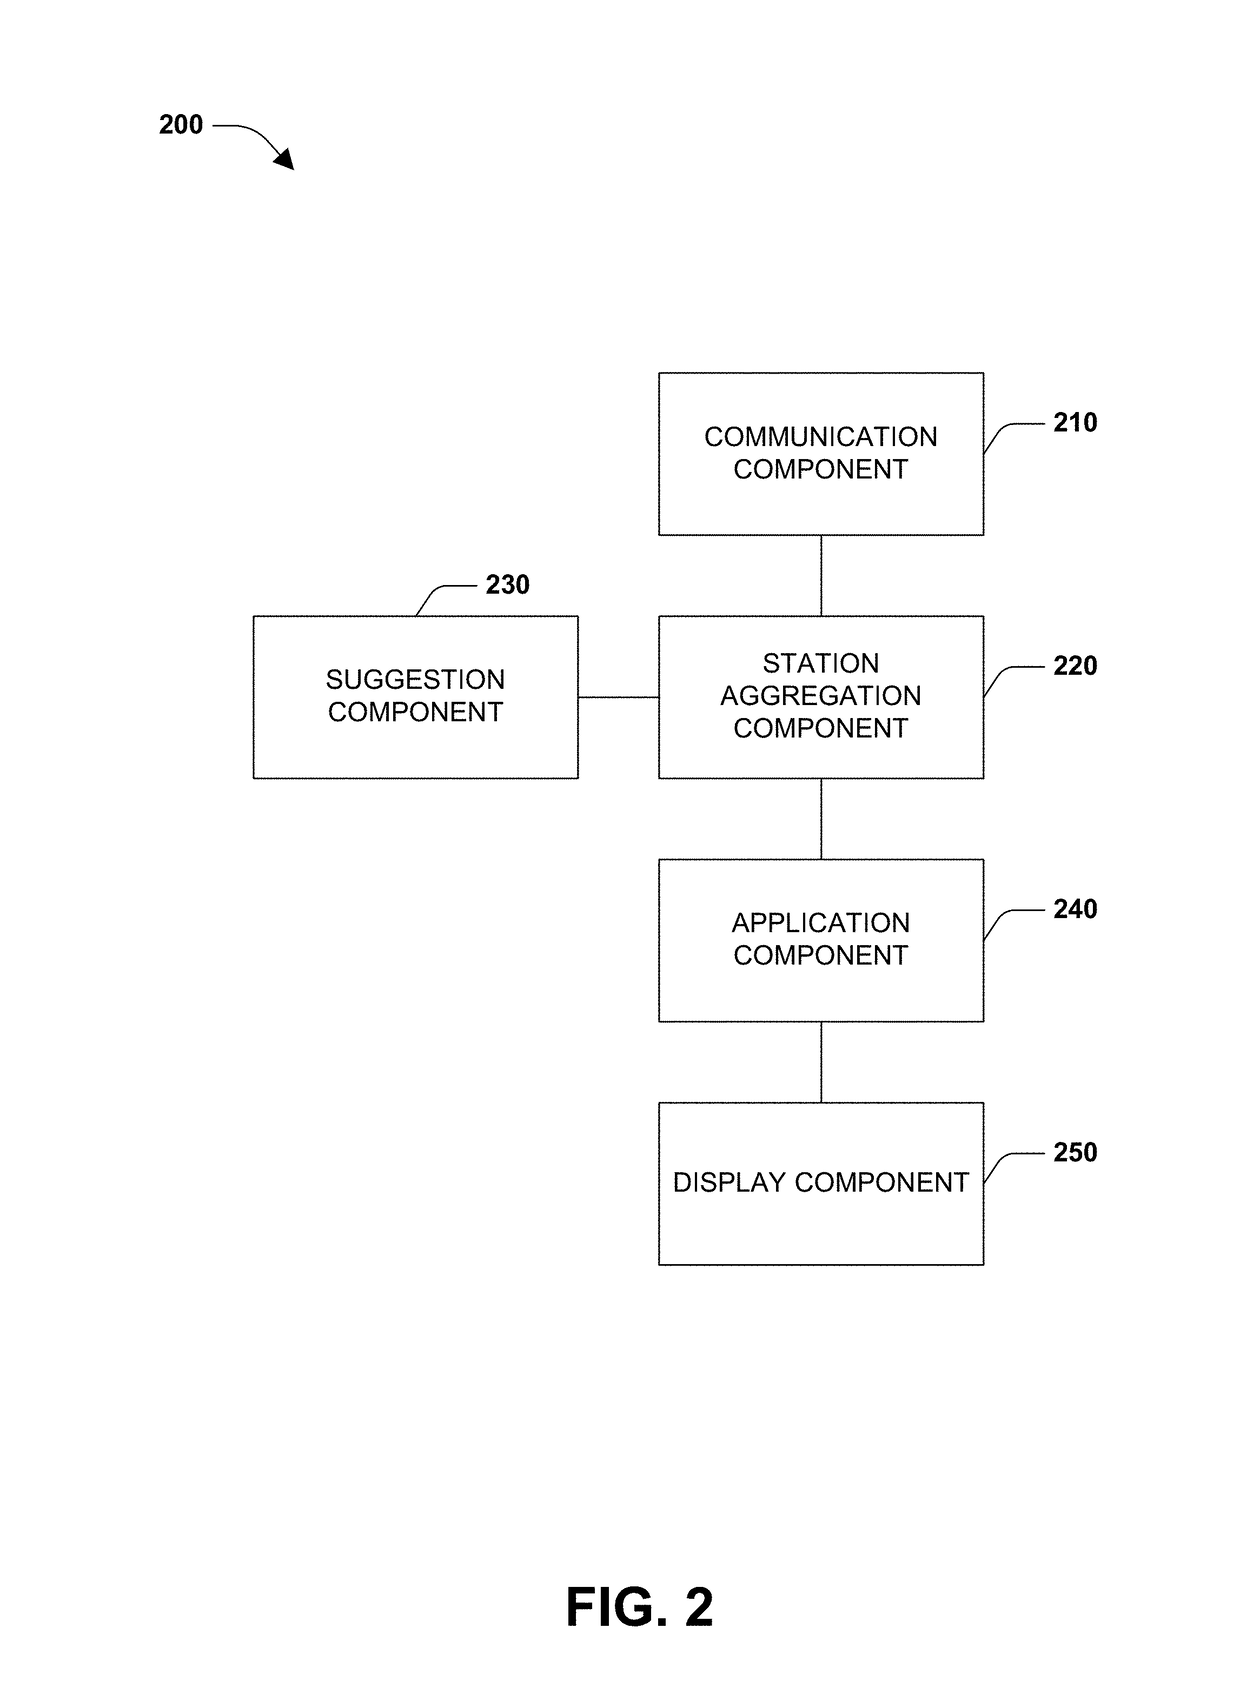 Management of stations using preferences from social networking profiles